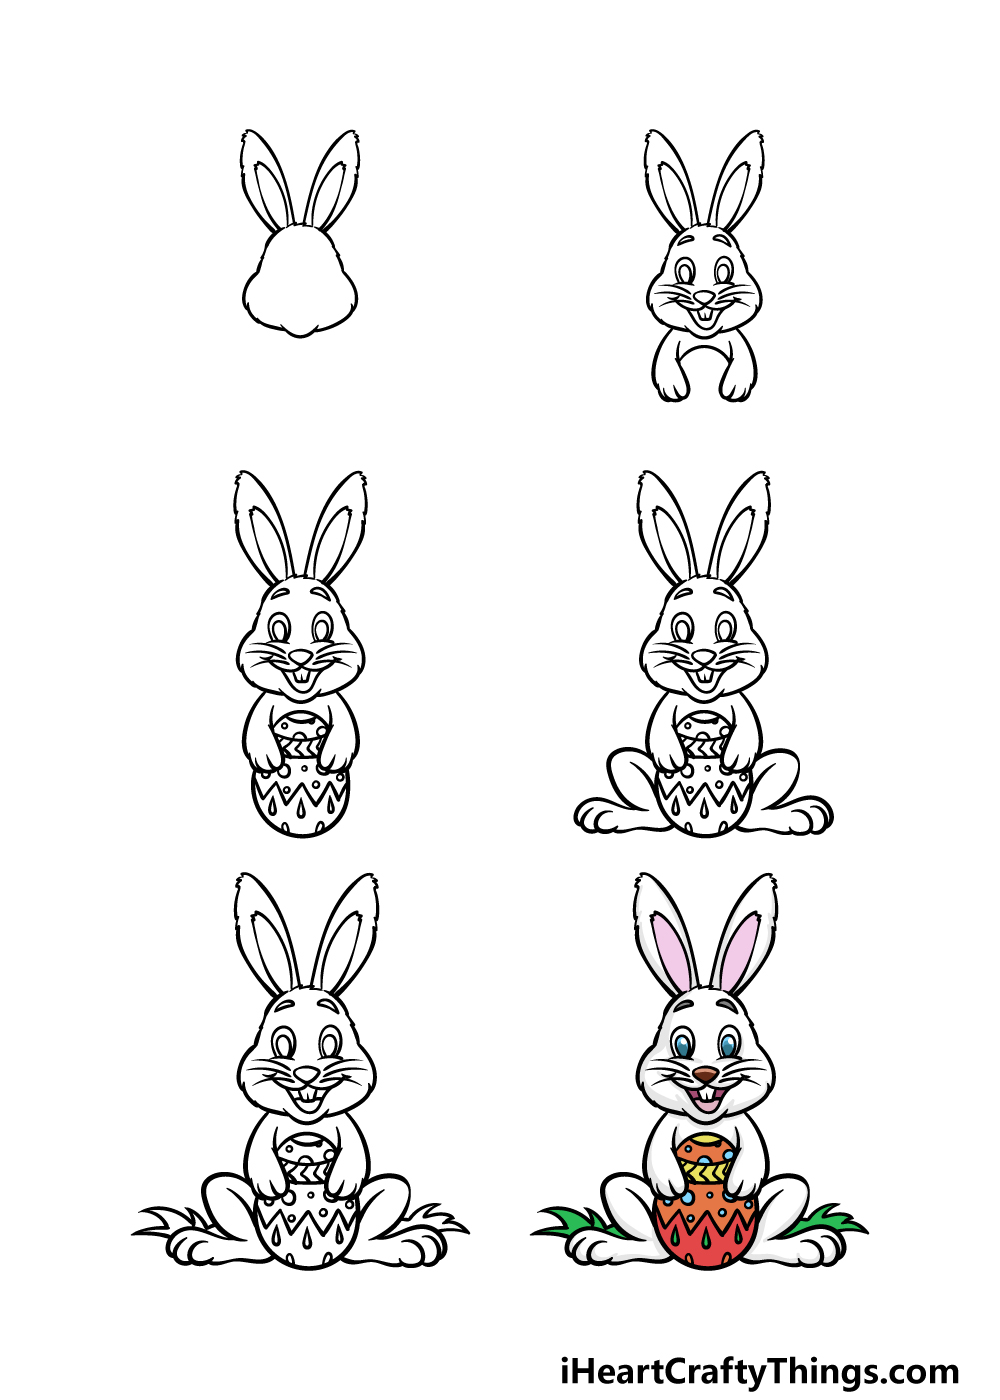 how to draw The Easter Bunny in 6 steps